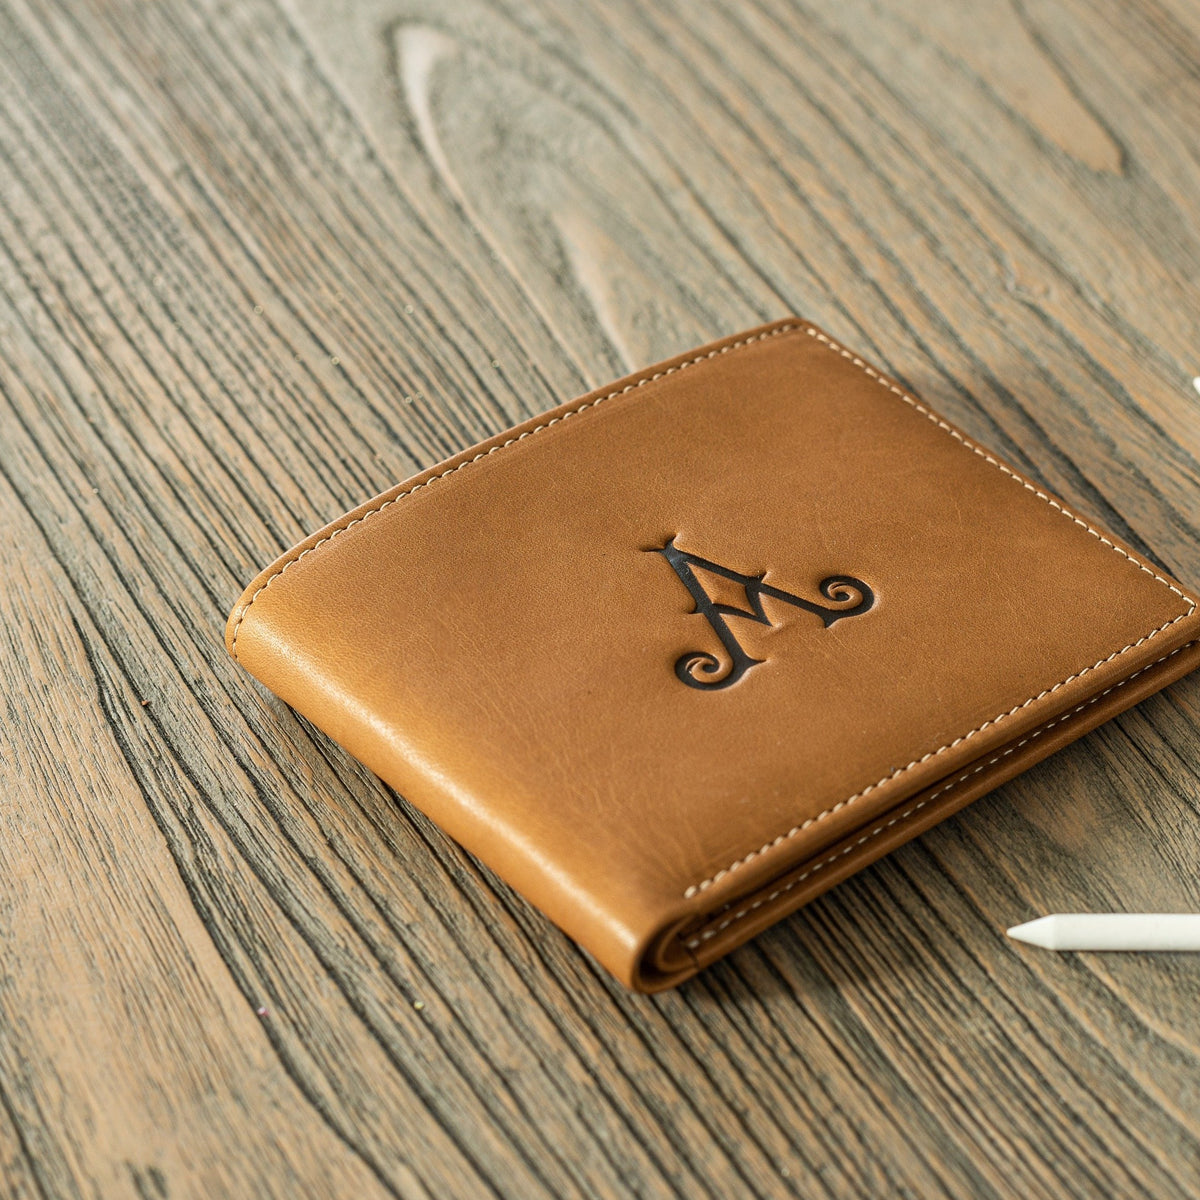 Adare Manor Leather Wallet